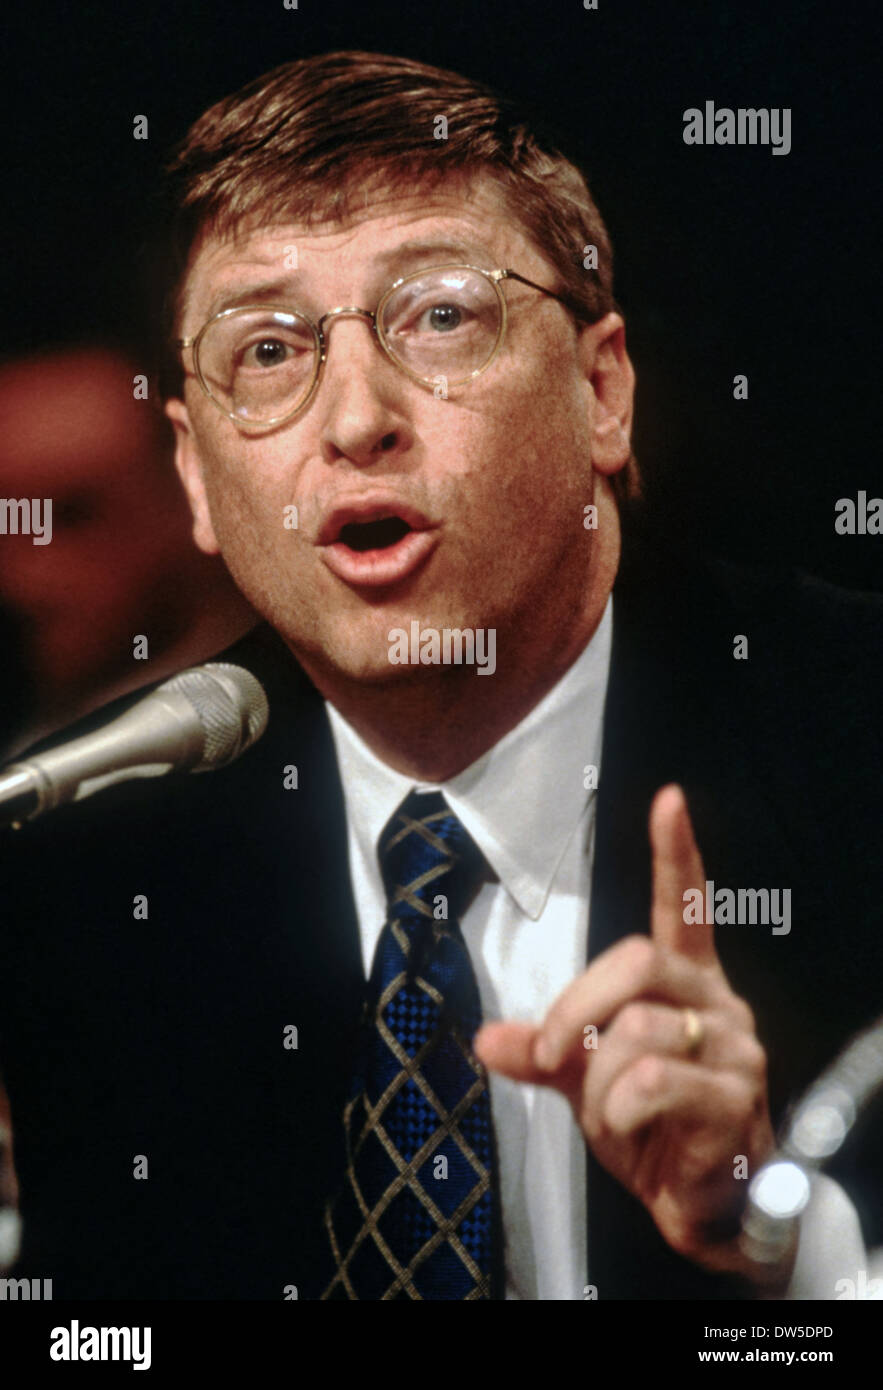 Bill Gates, CEO & founder of Microsoft testifies in Congress on Microsoft anti-trust allegations March 3, 1998 in Washington, DC. Stock Photo